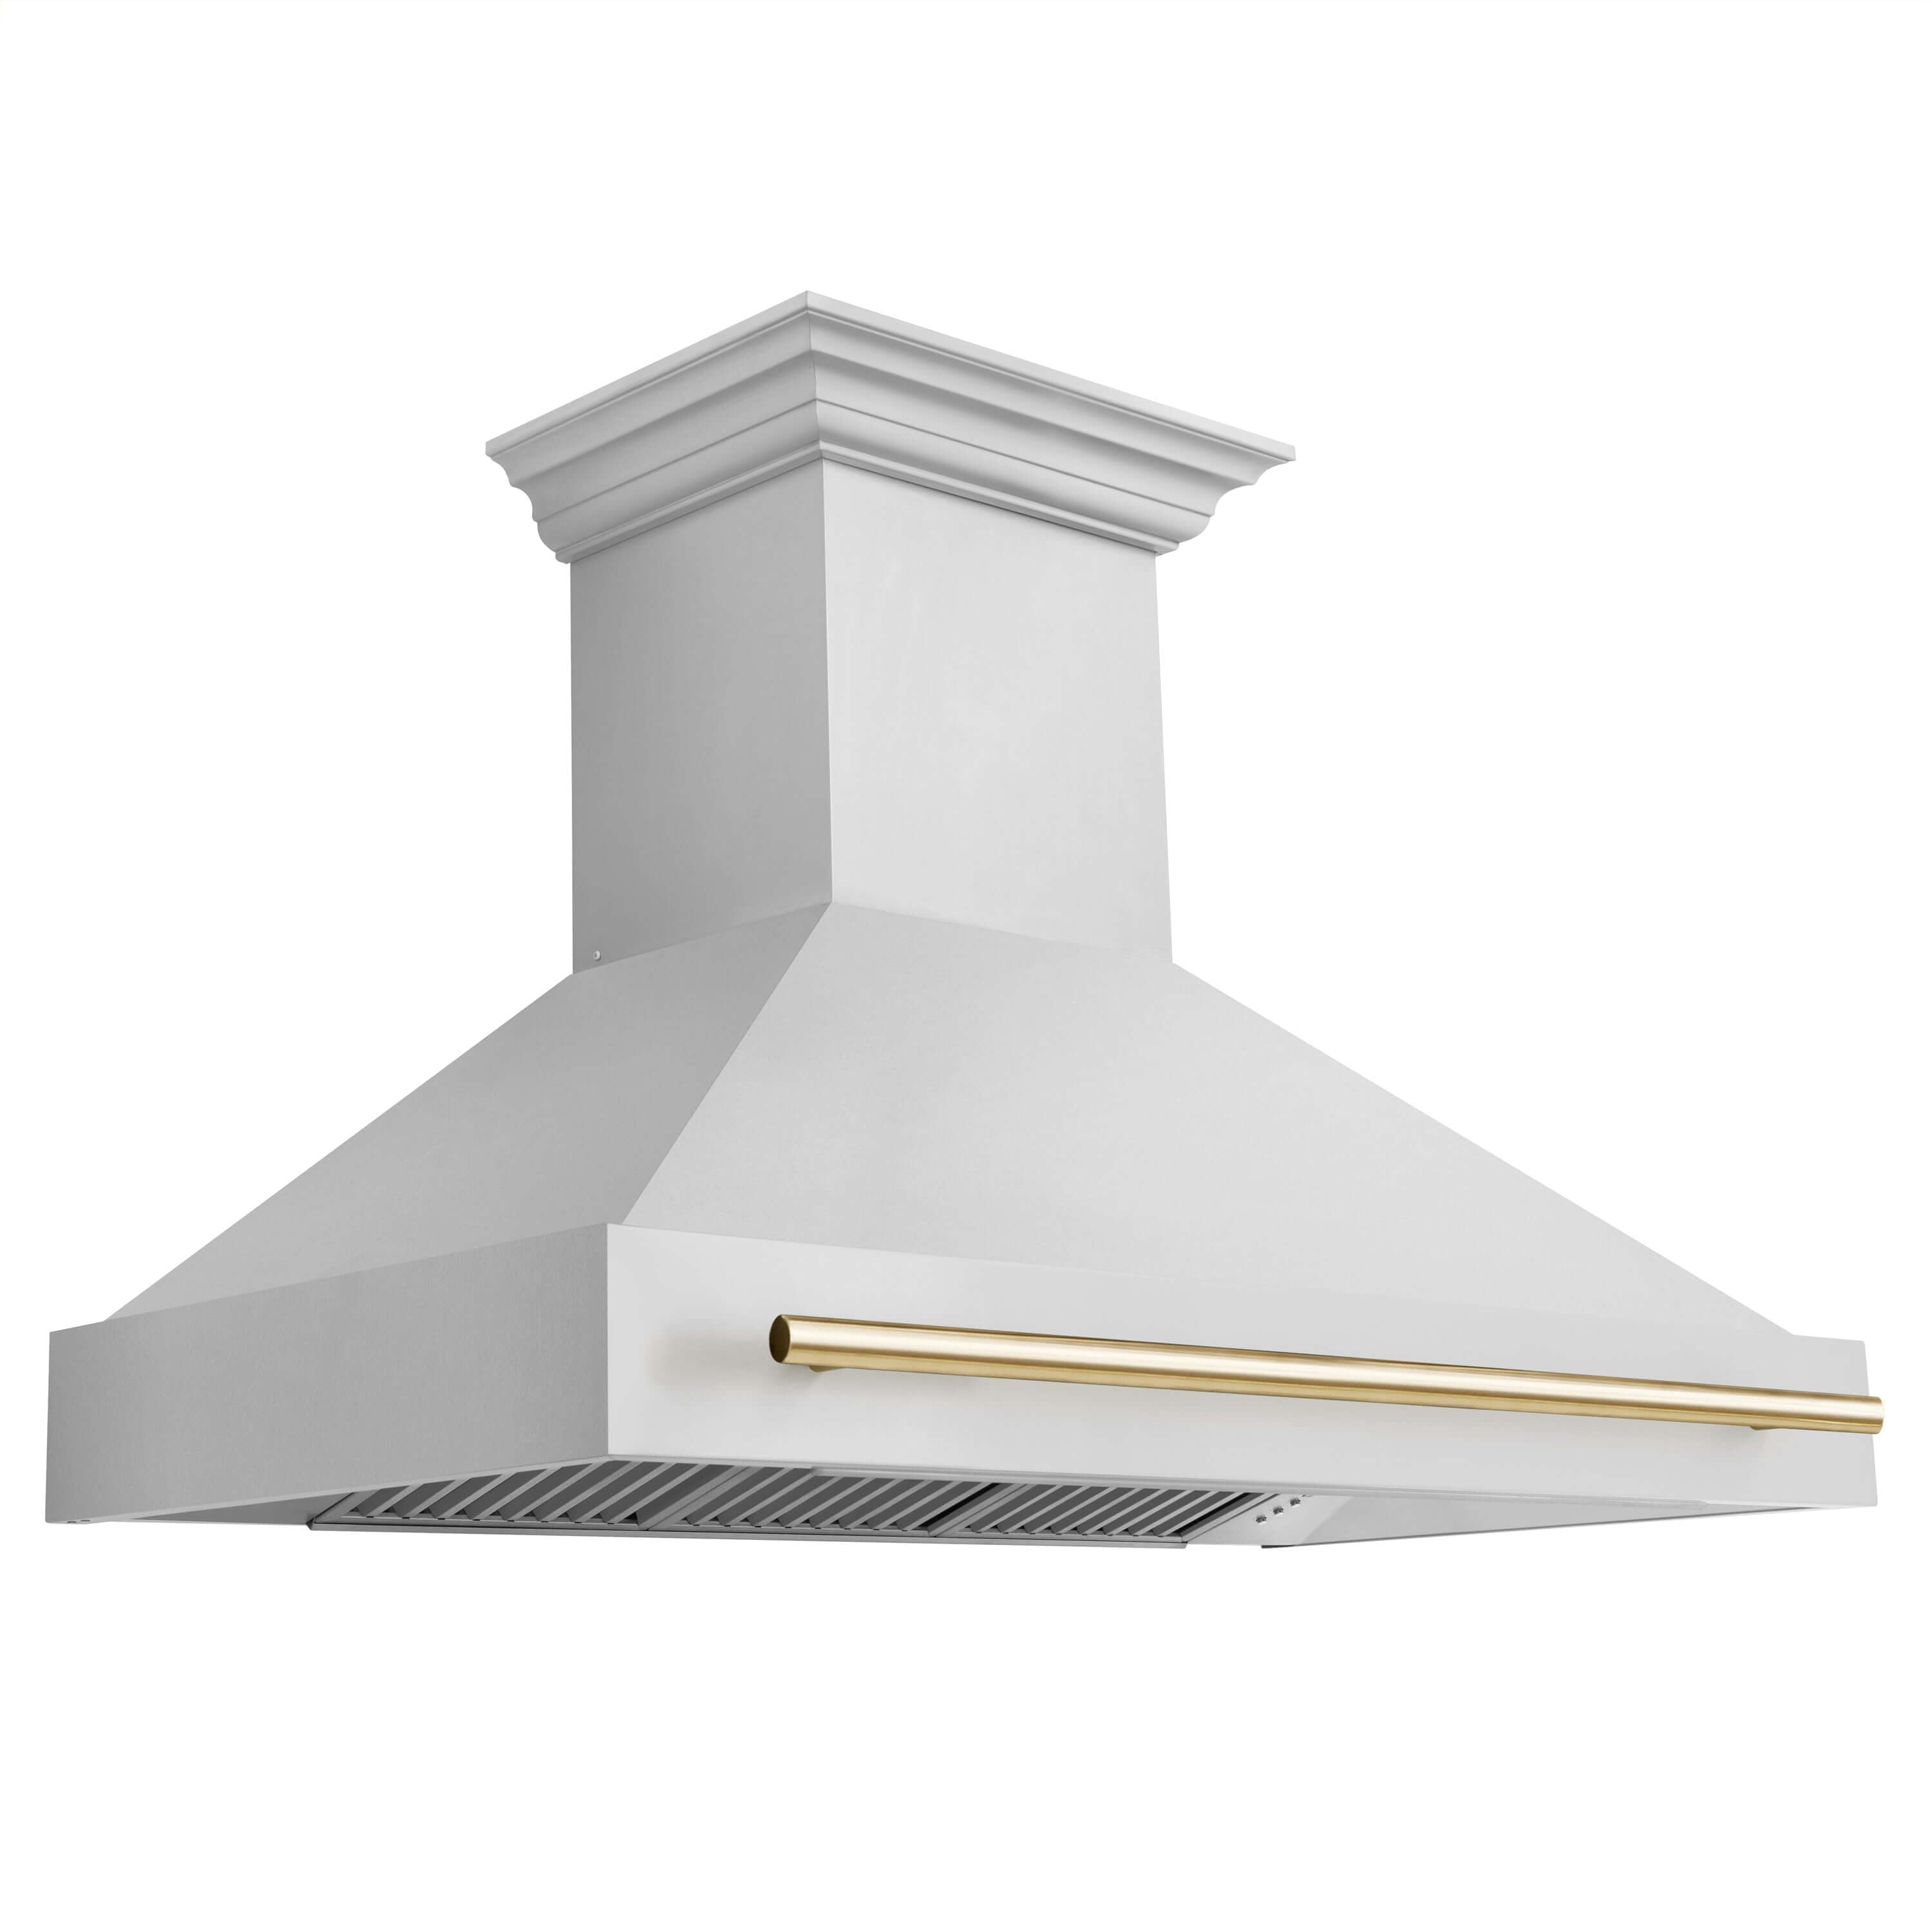 ZLINE 48" Autograph Edition Stainless Steel Range Hood with Stainless Steel Shell and Champagne Bronze Handle (8654STZ-48-CB)